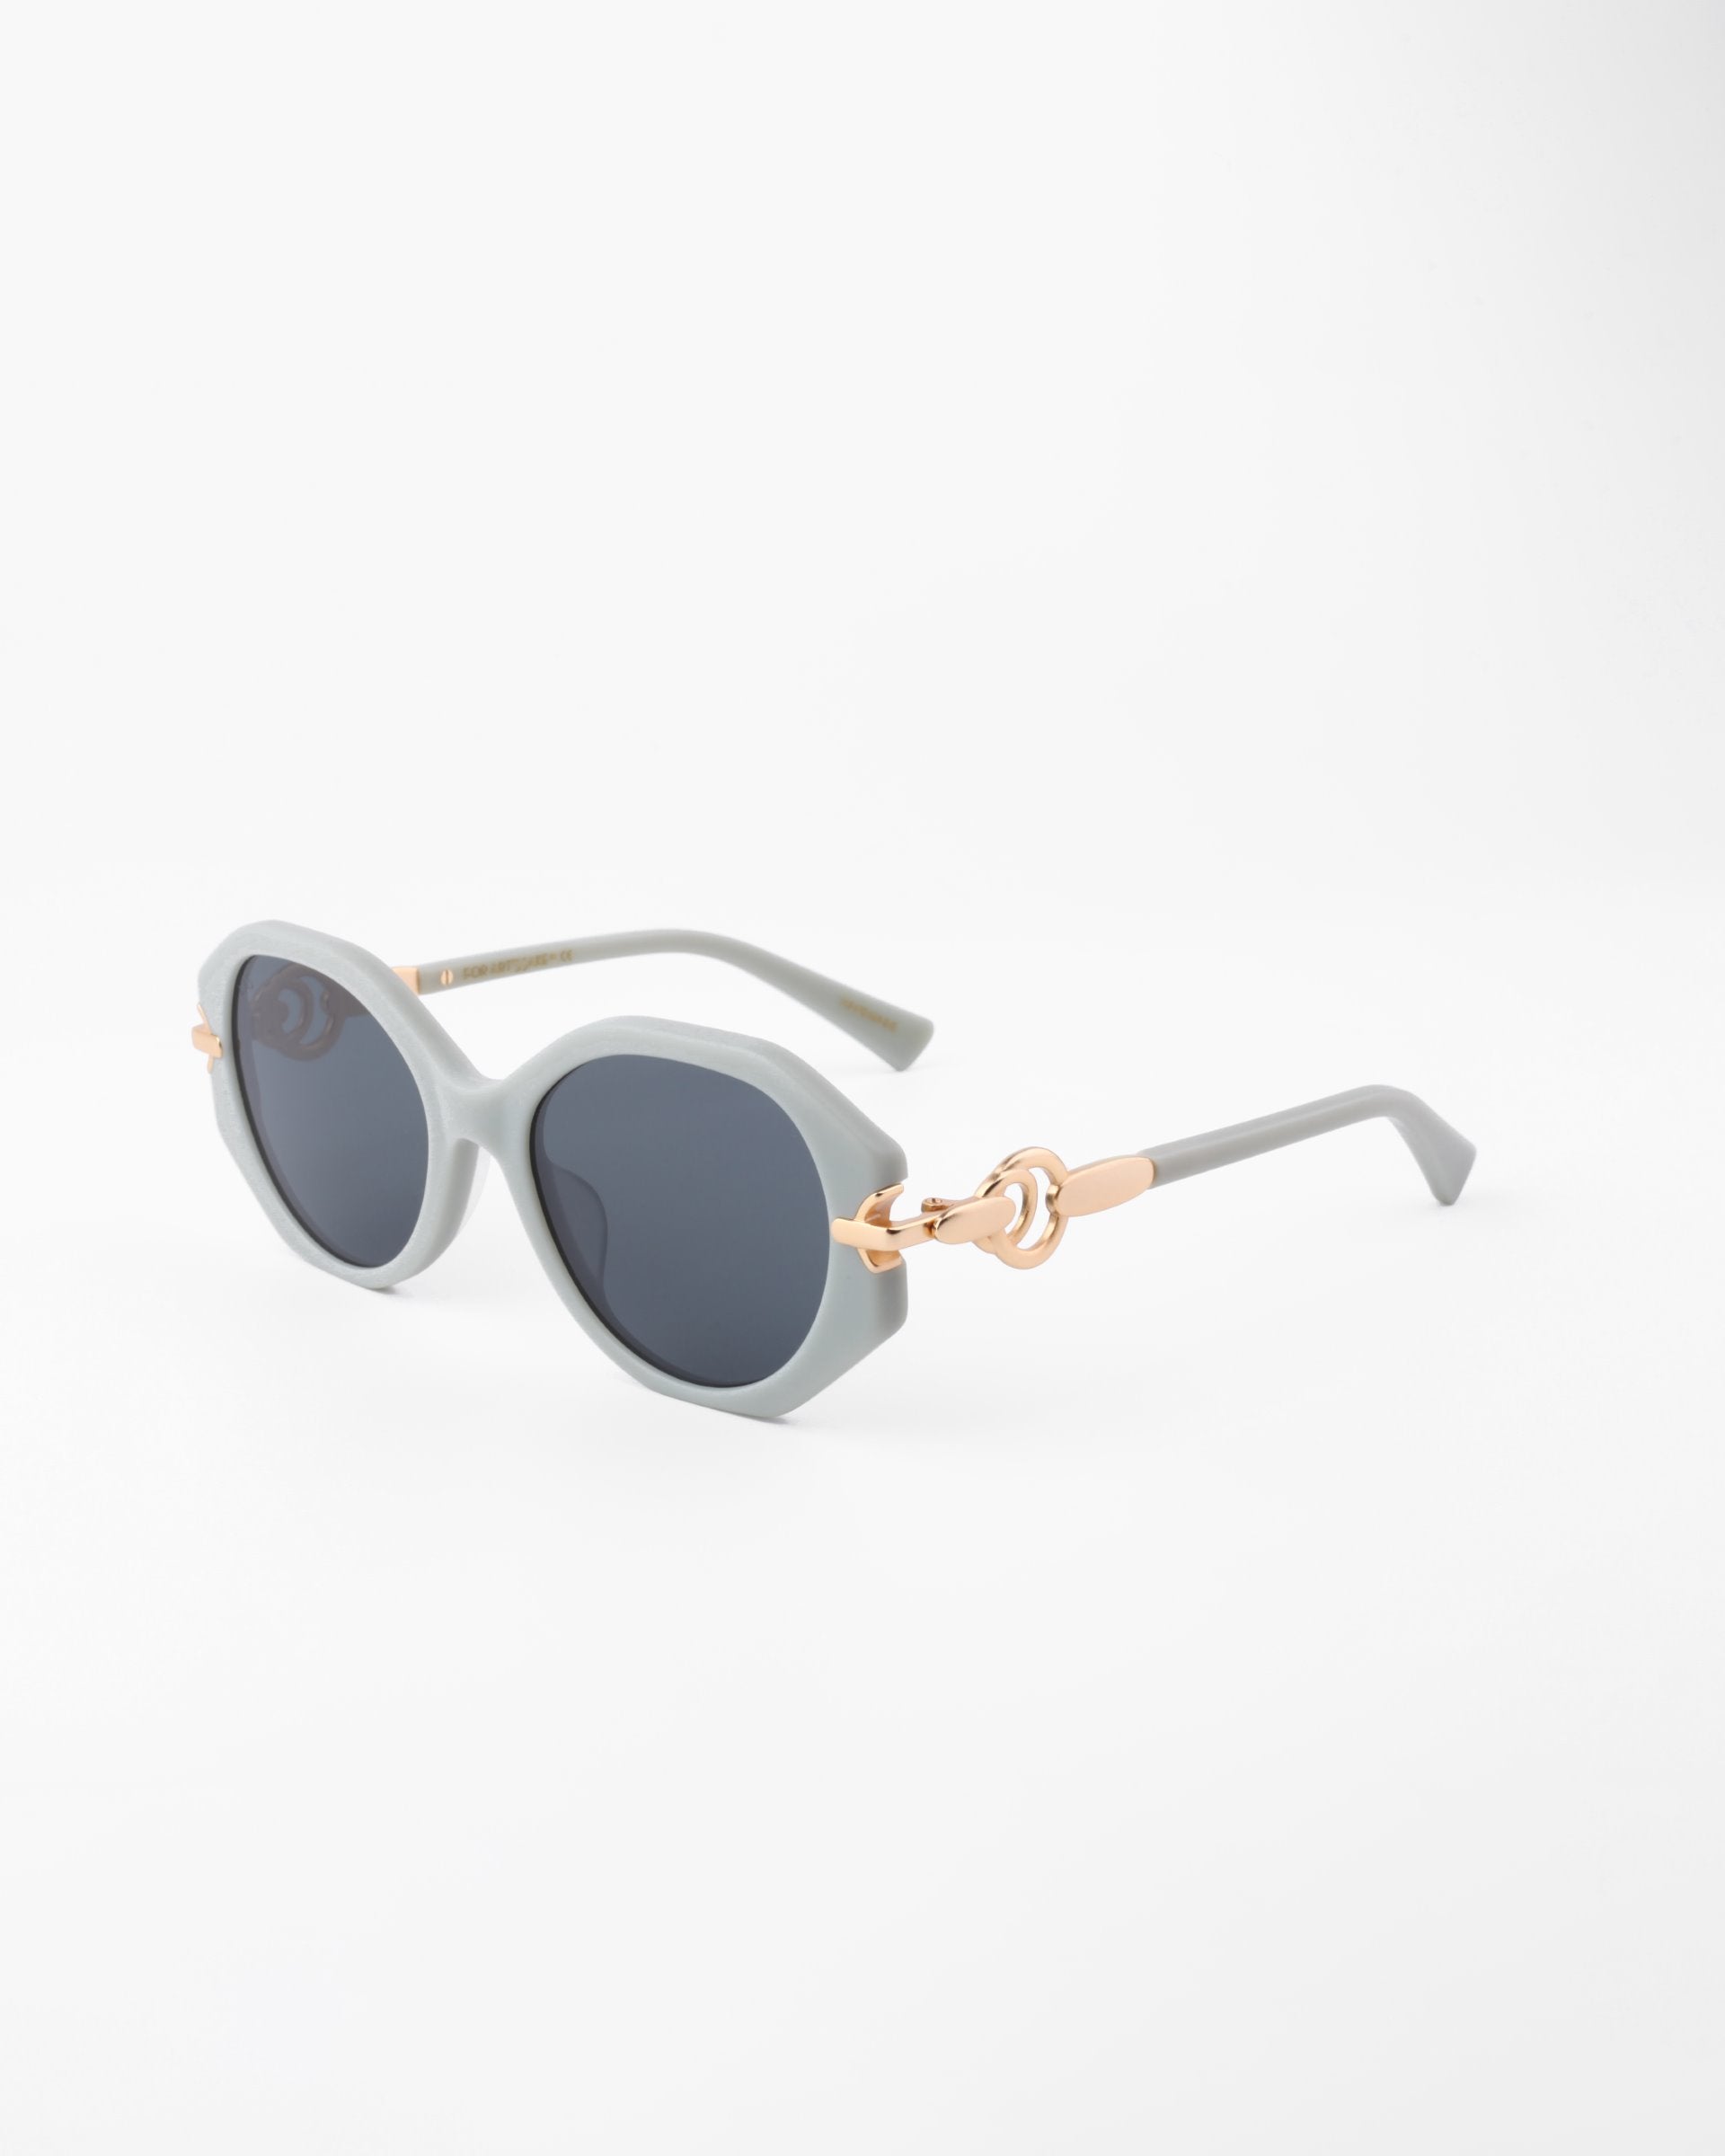 A pair of stylish Seaside sunglasses by For Art's Sake® featuring round black lenses with a light gray, semi-translucent, handmade acetate frame. The temples have gold-plated detailing near the hinges, adding a touch of elegance to the design. The background is plain white.